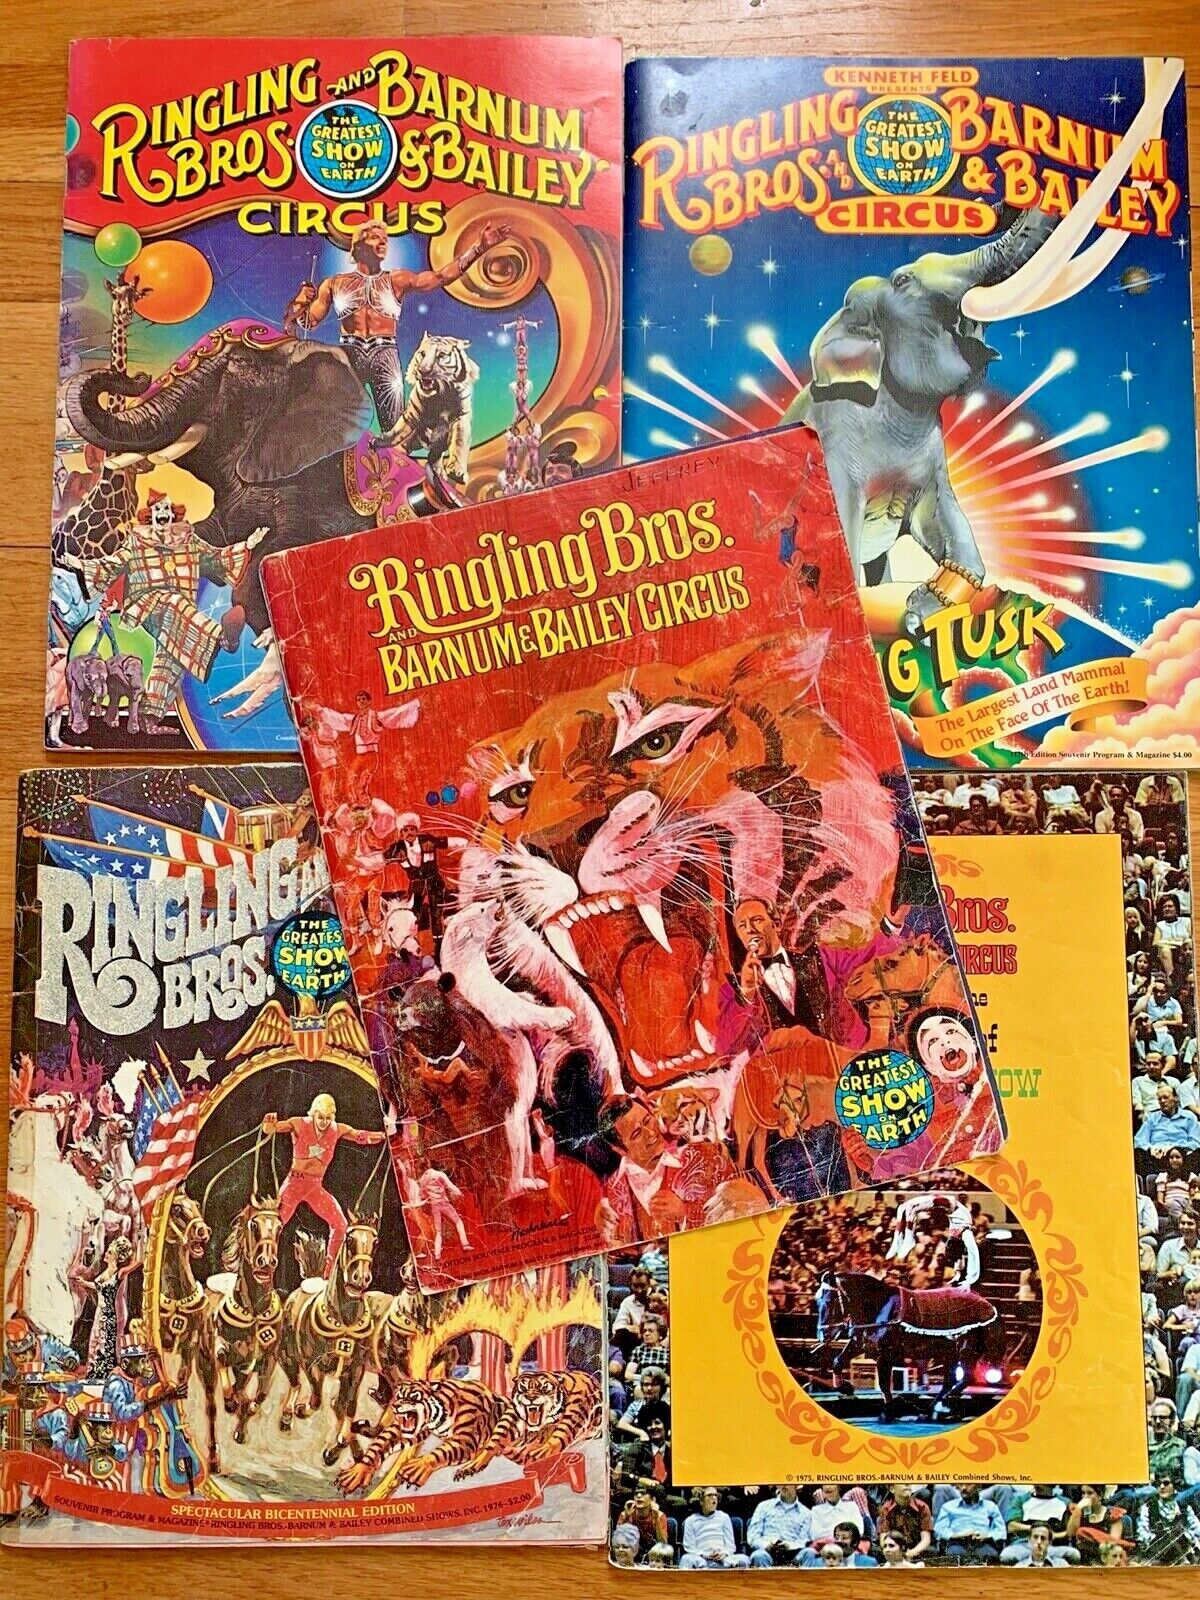 vtg Ringling Bros and Barnum & Bailey Circus Program LOT poster 1975 1976 signed